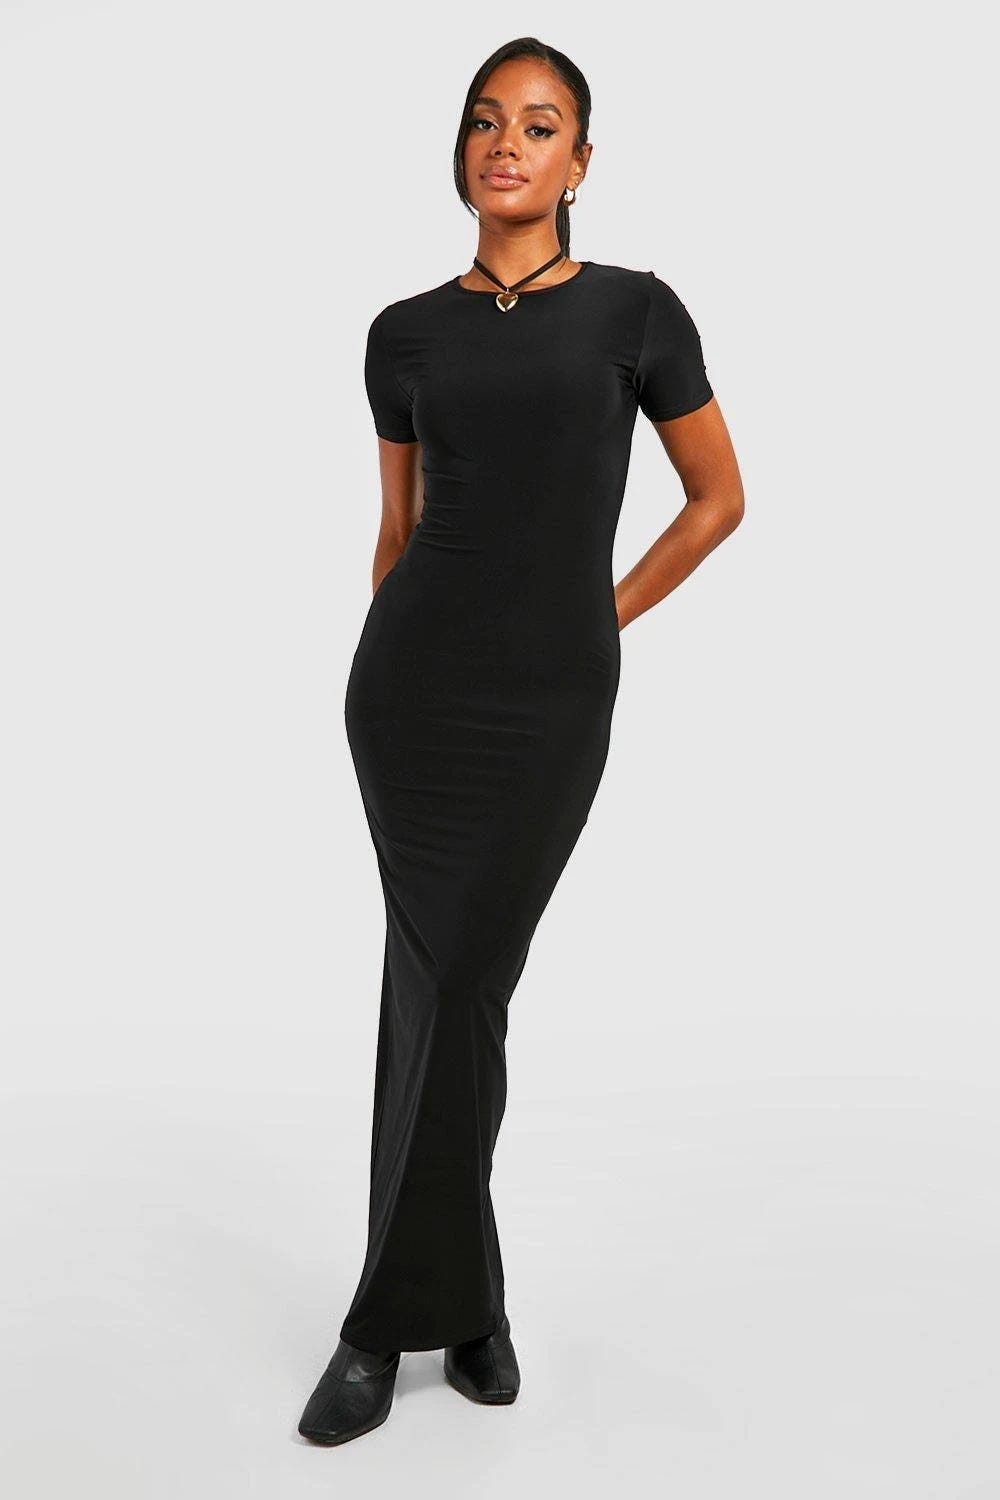 Sleek Black Maxi Dress for Any Occasion | Image